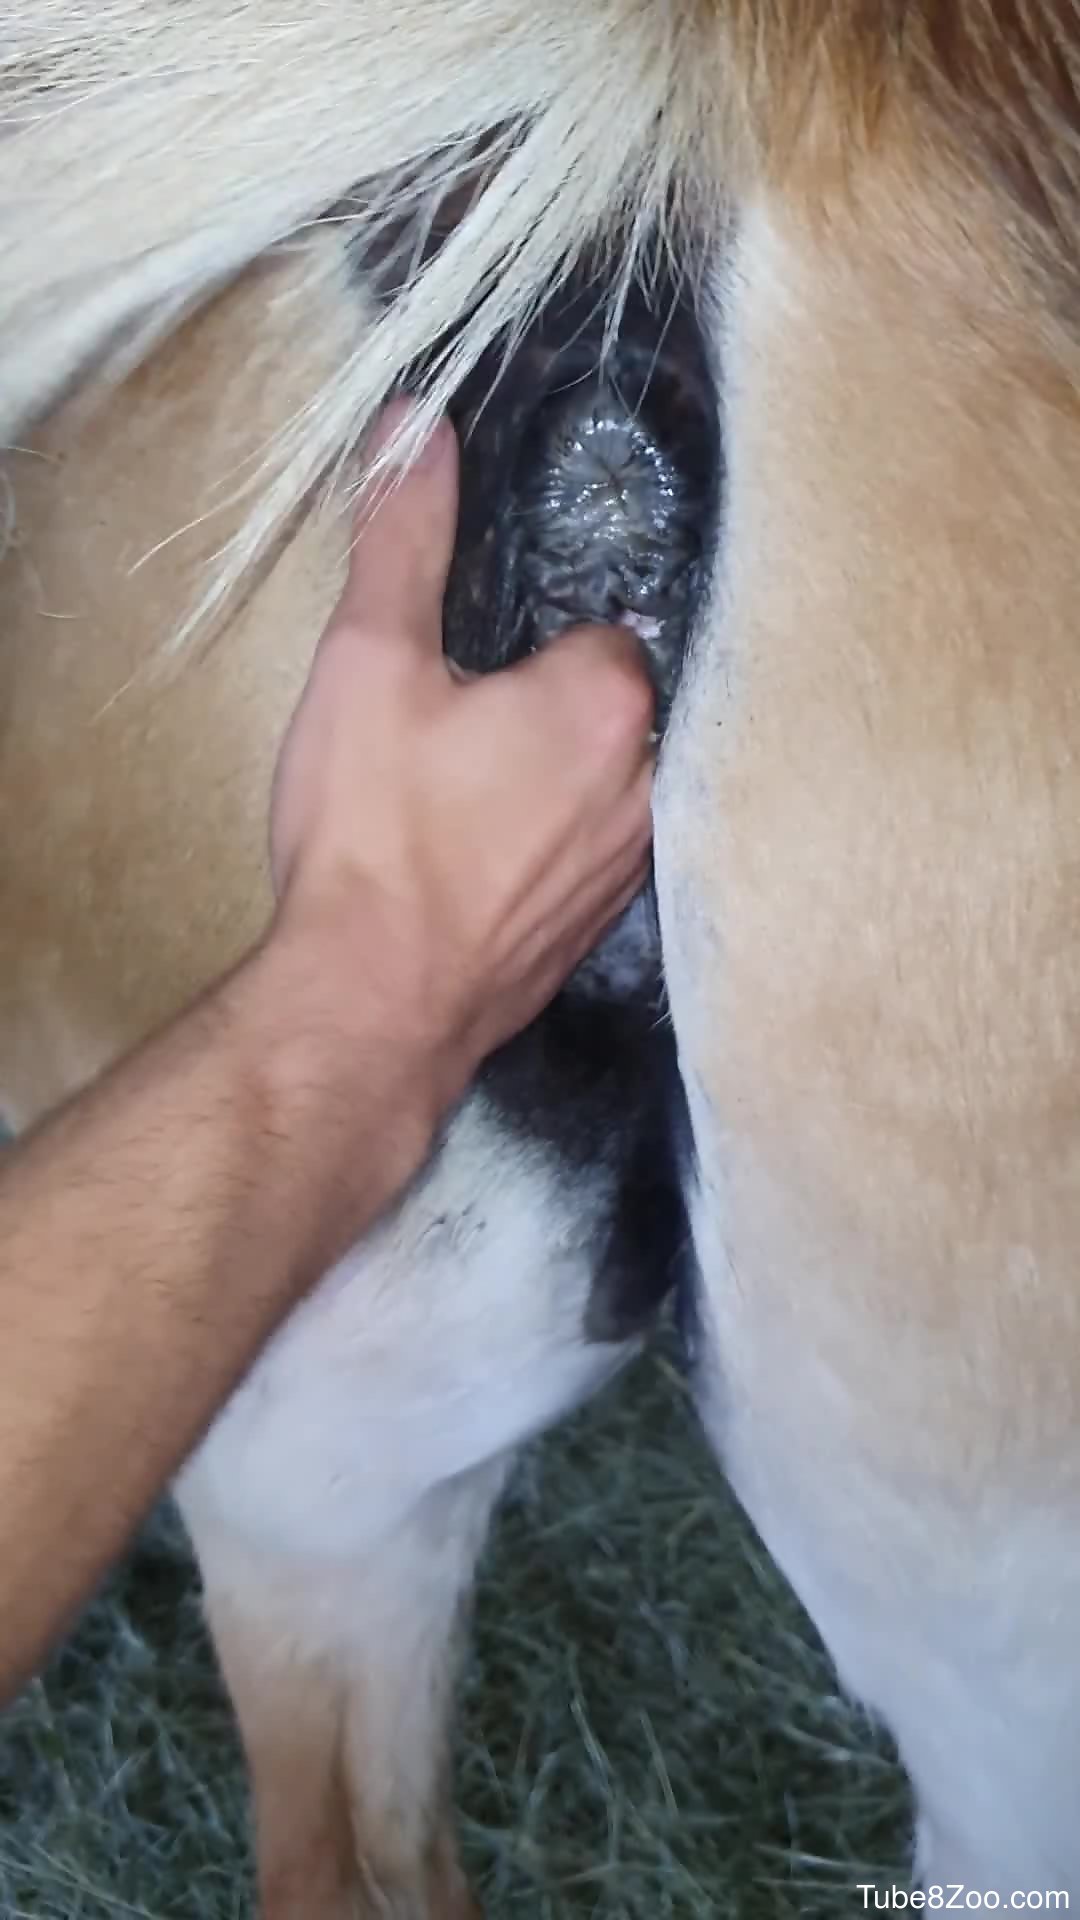 Man finger fucks horse in the ass and records himself